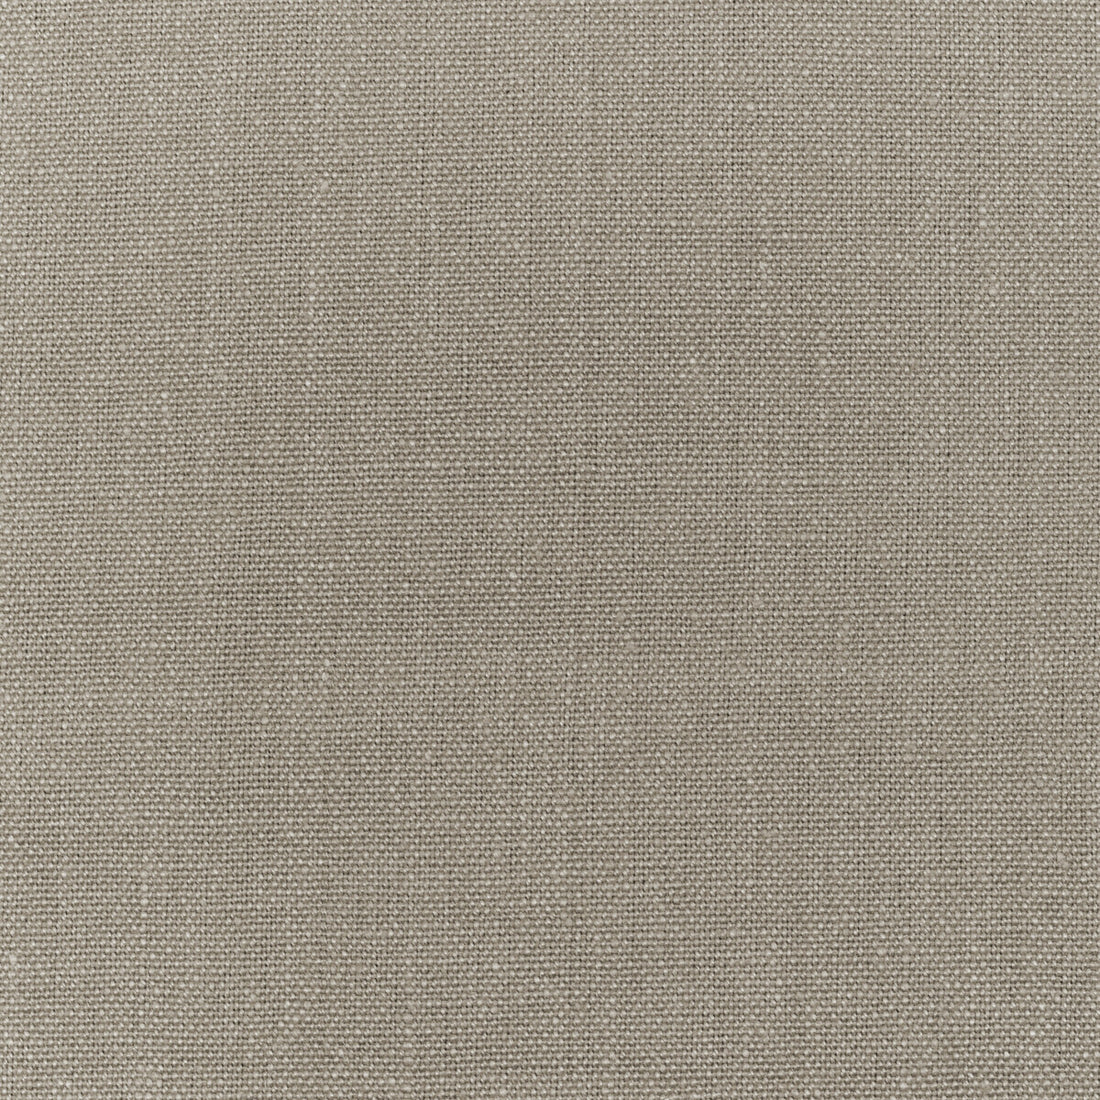 Adhara fabric in linen color - pattern 32514.11.0 - by Kravet Basics in the Jonathan Adler Utopia collection